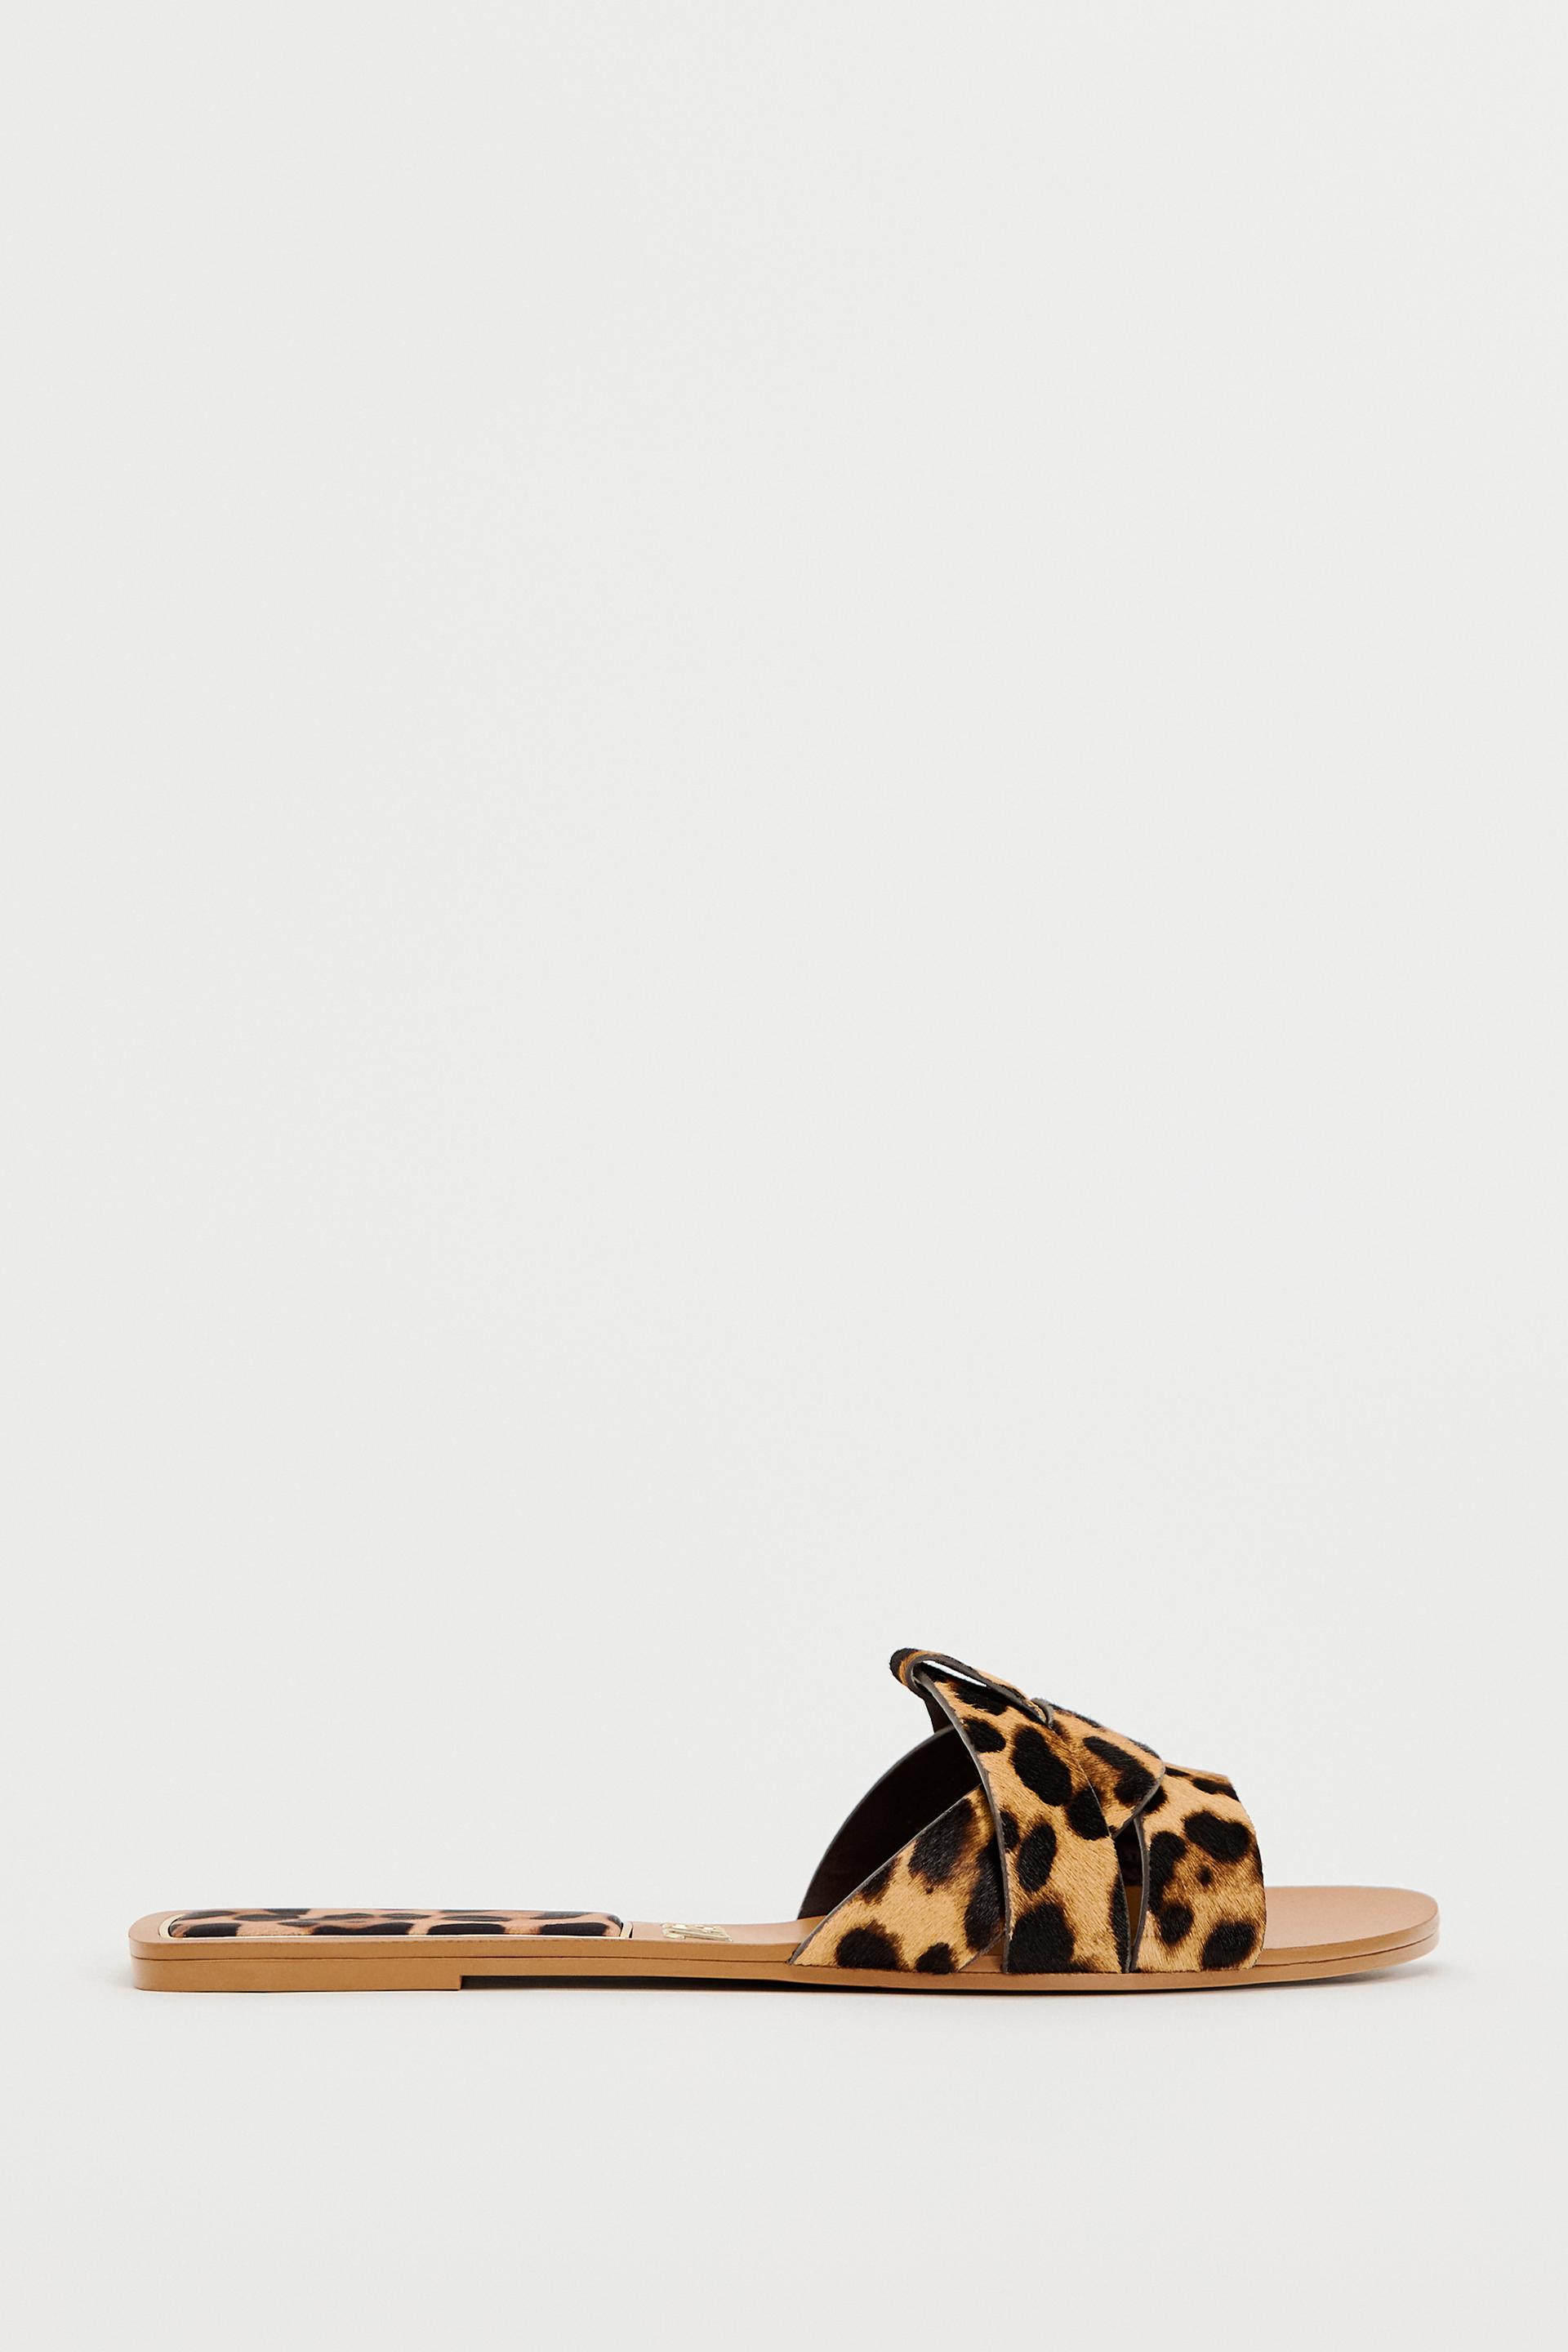 ANIMAL PRINT KNOTTED SANDALS - Leopard